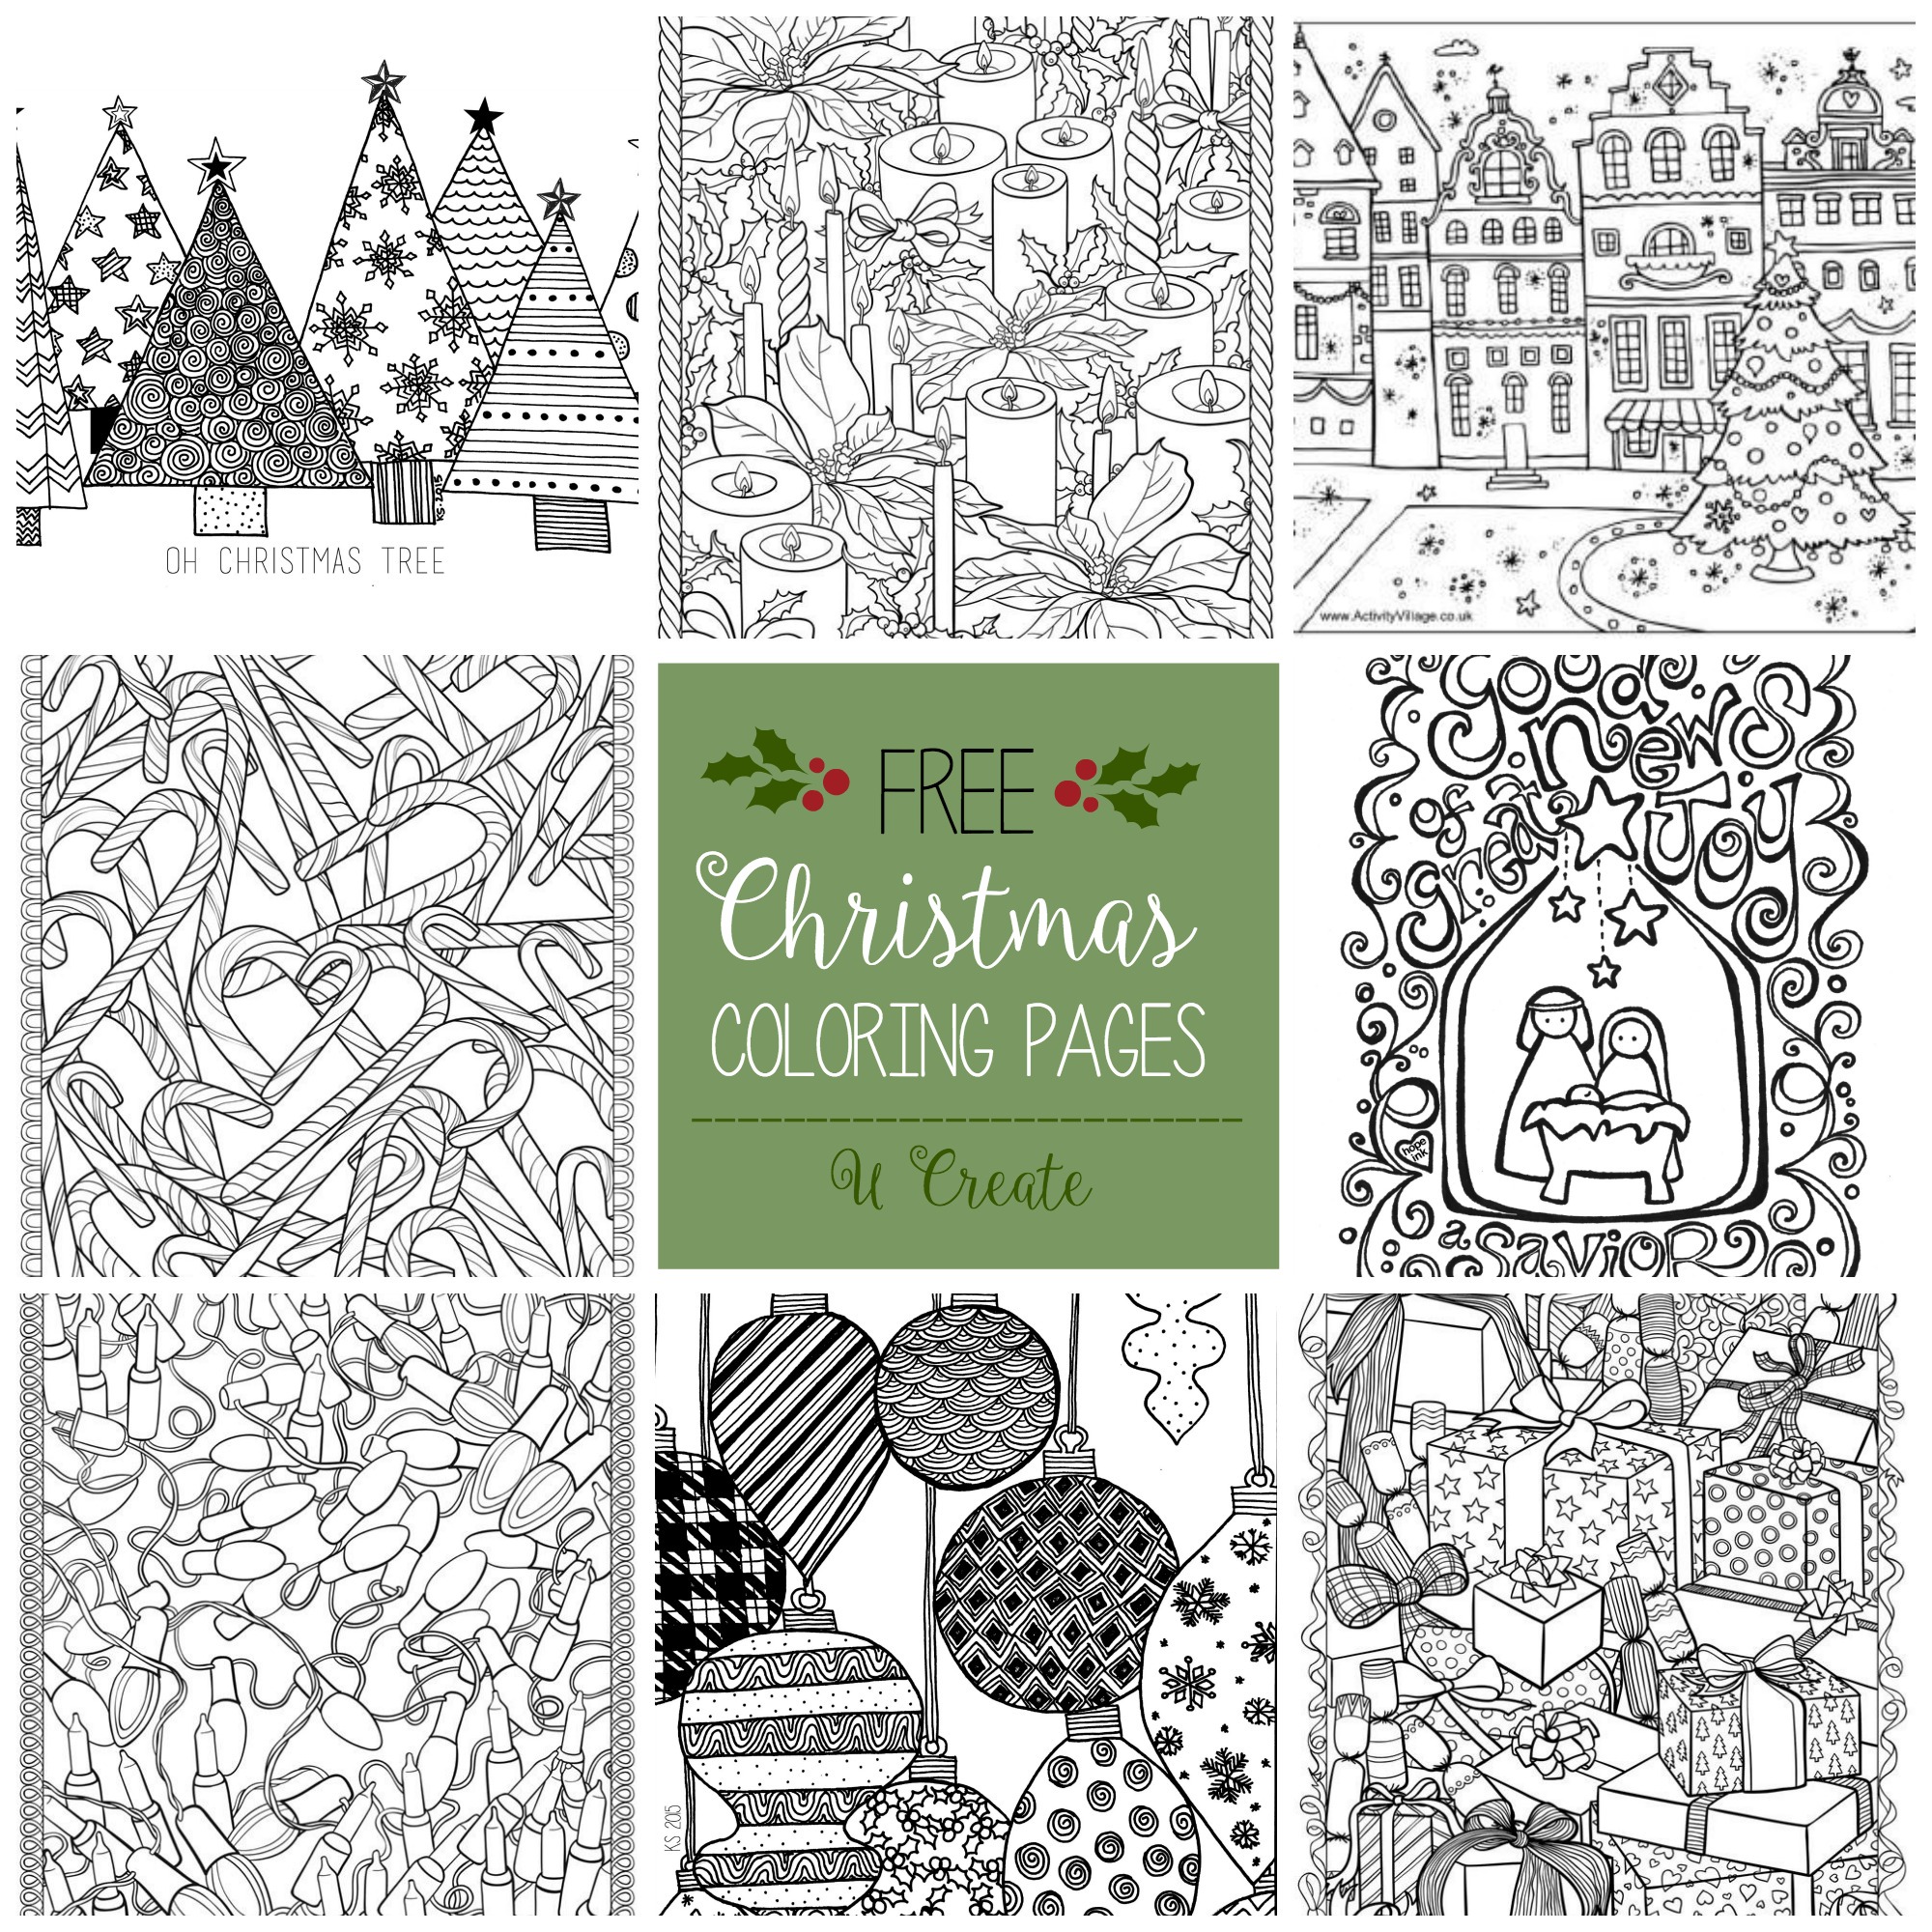 Free Christmas Adult Coloring Pages - U Create